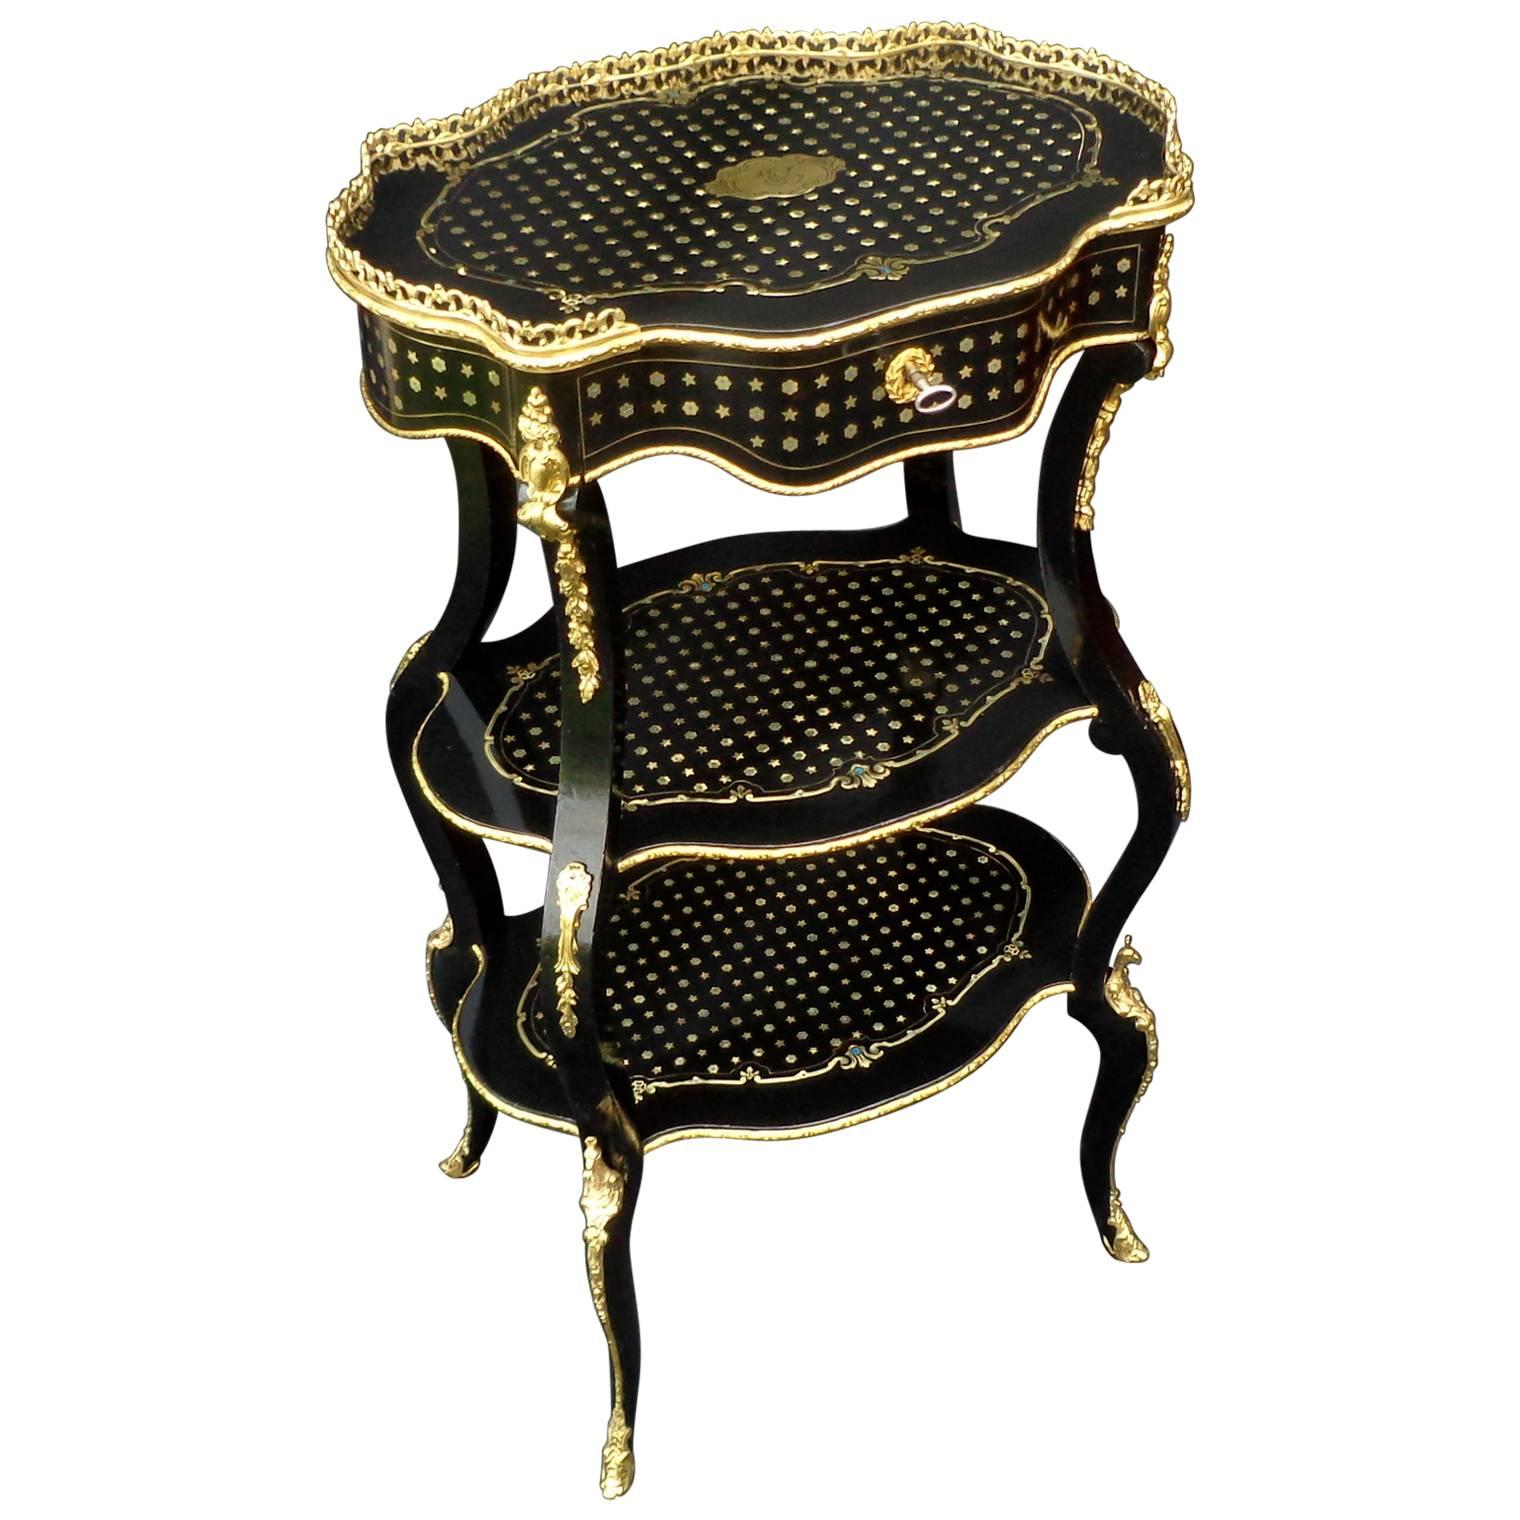 Small Table in Boulle Marquetry Turquoise, Napoleon III Period, 19th Century